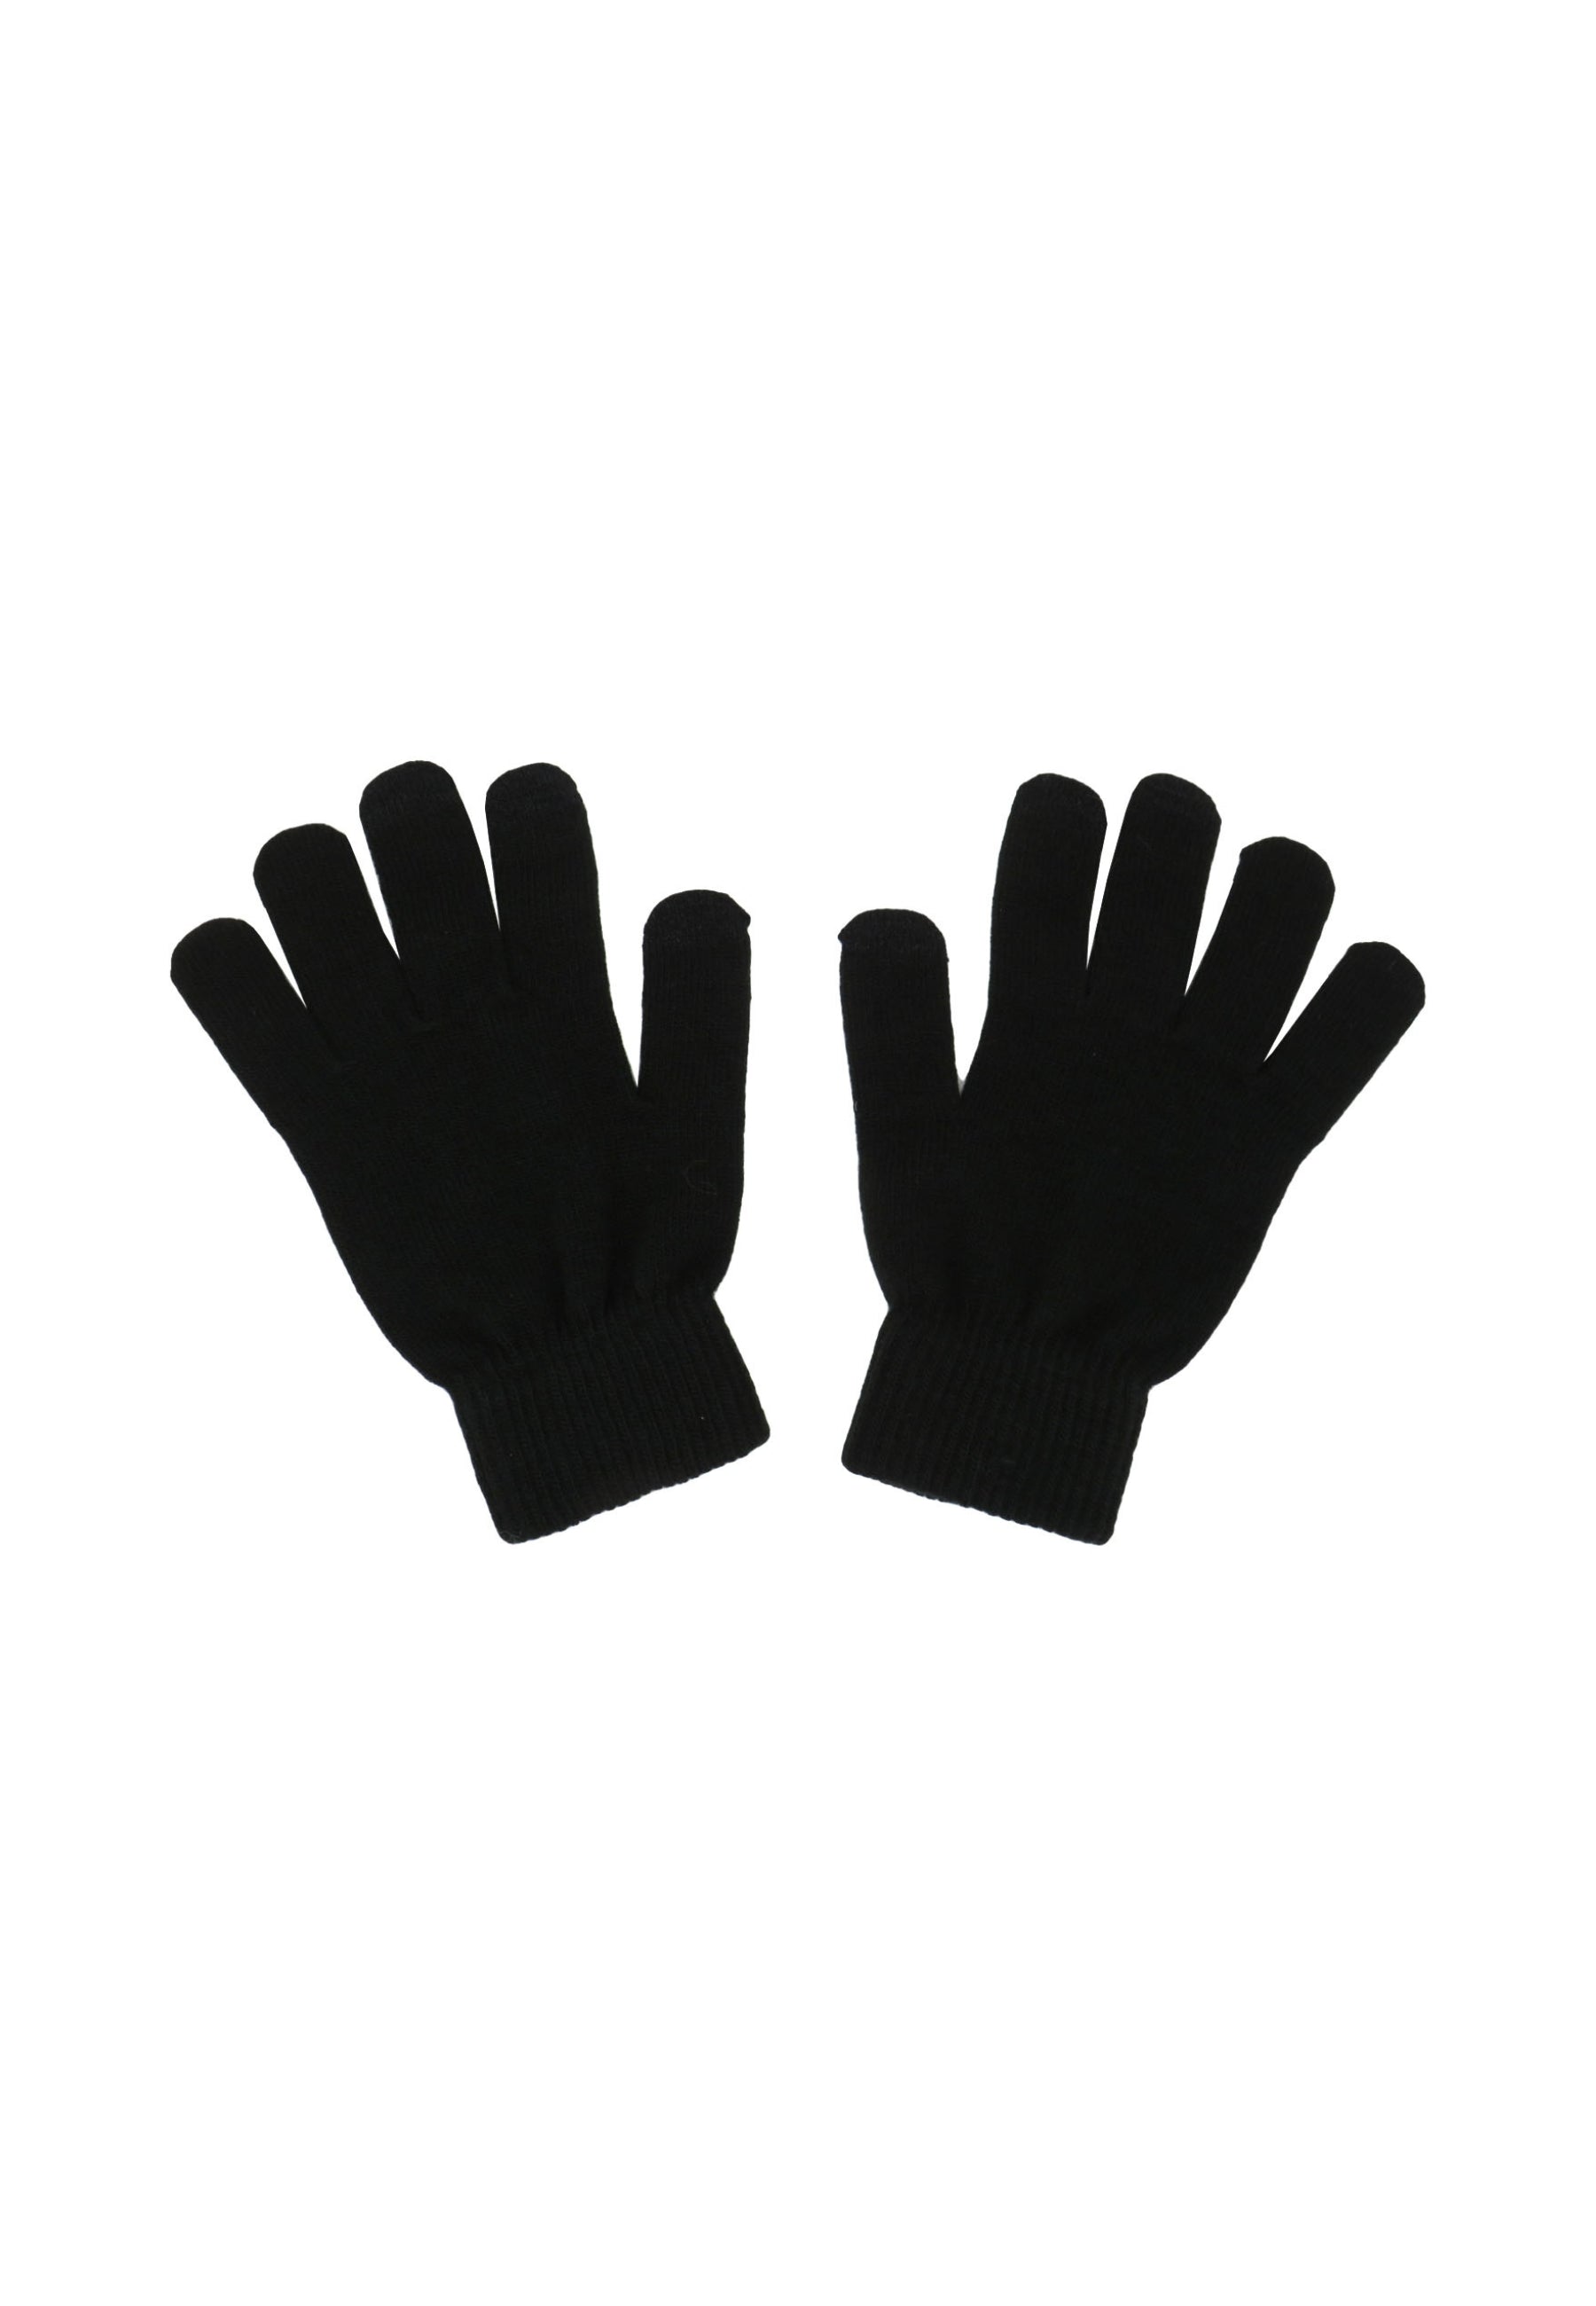 My Accessories London Plain Knitted Gloves in Black | Touchscreen | Plain | Knitted | Basic | Basics | Essential | Minimal